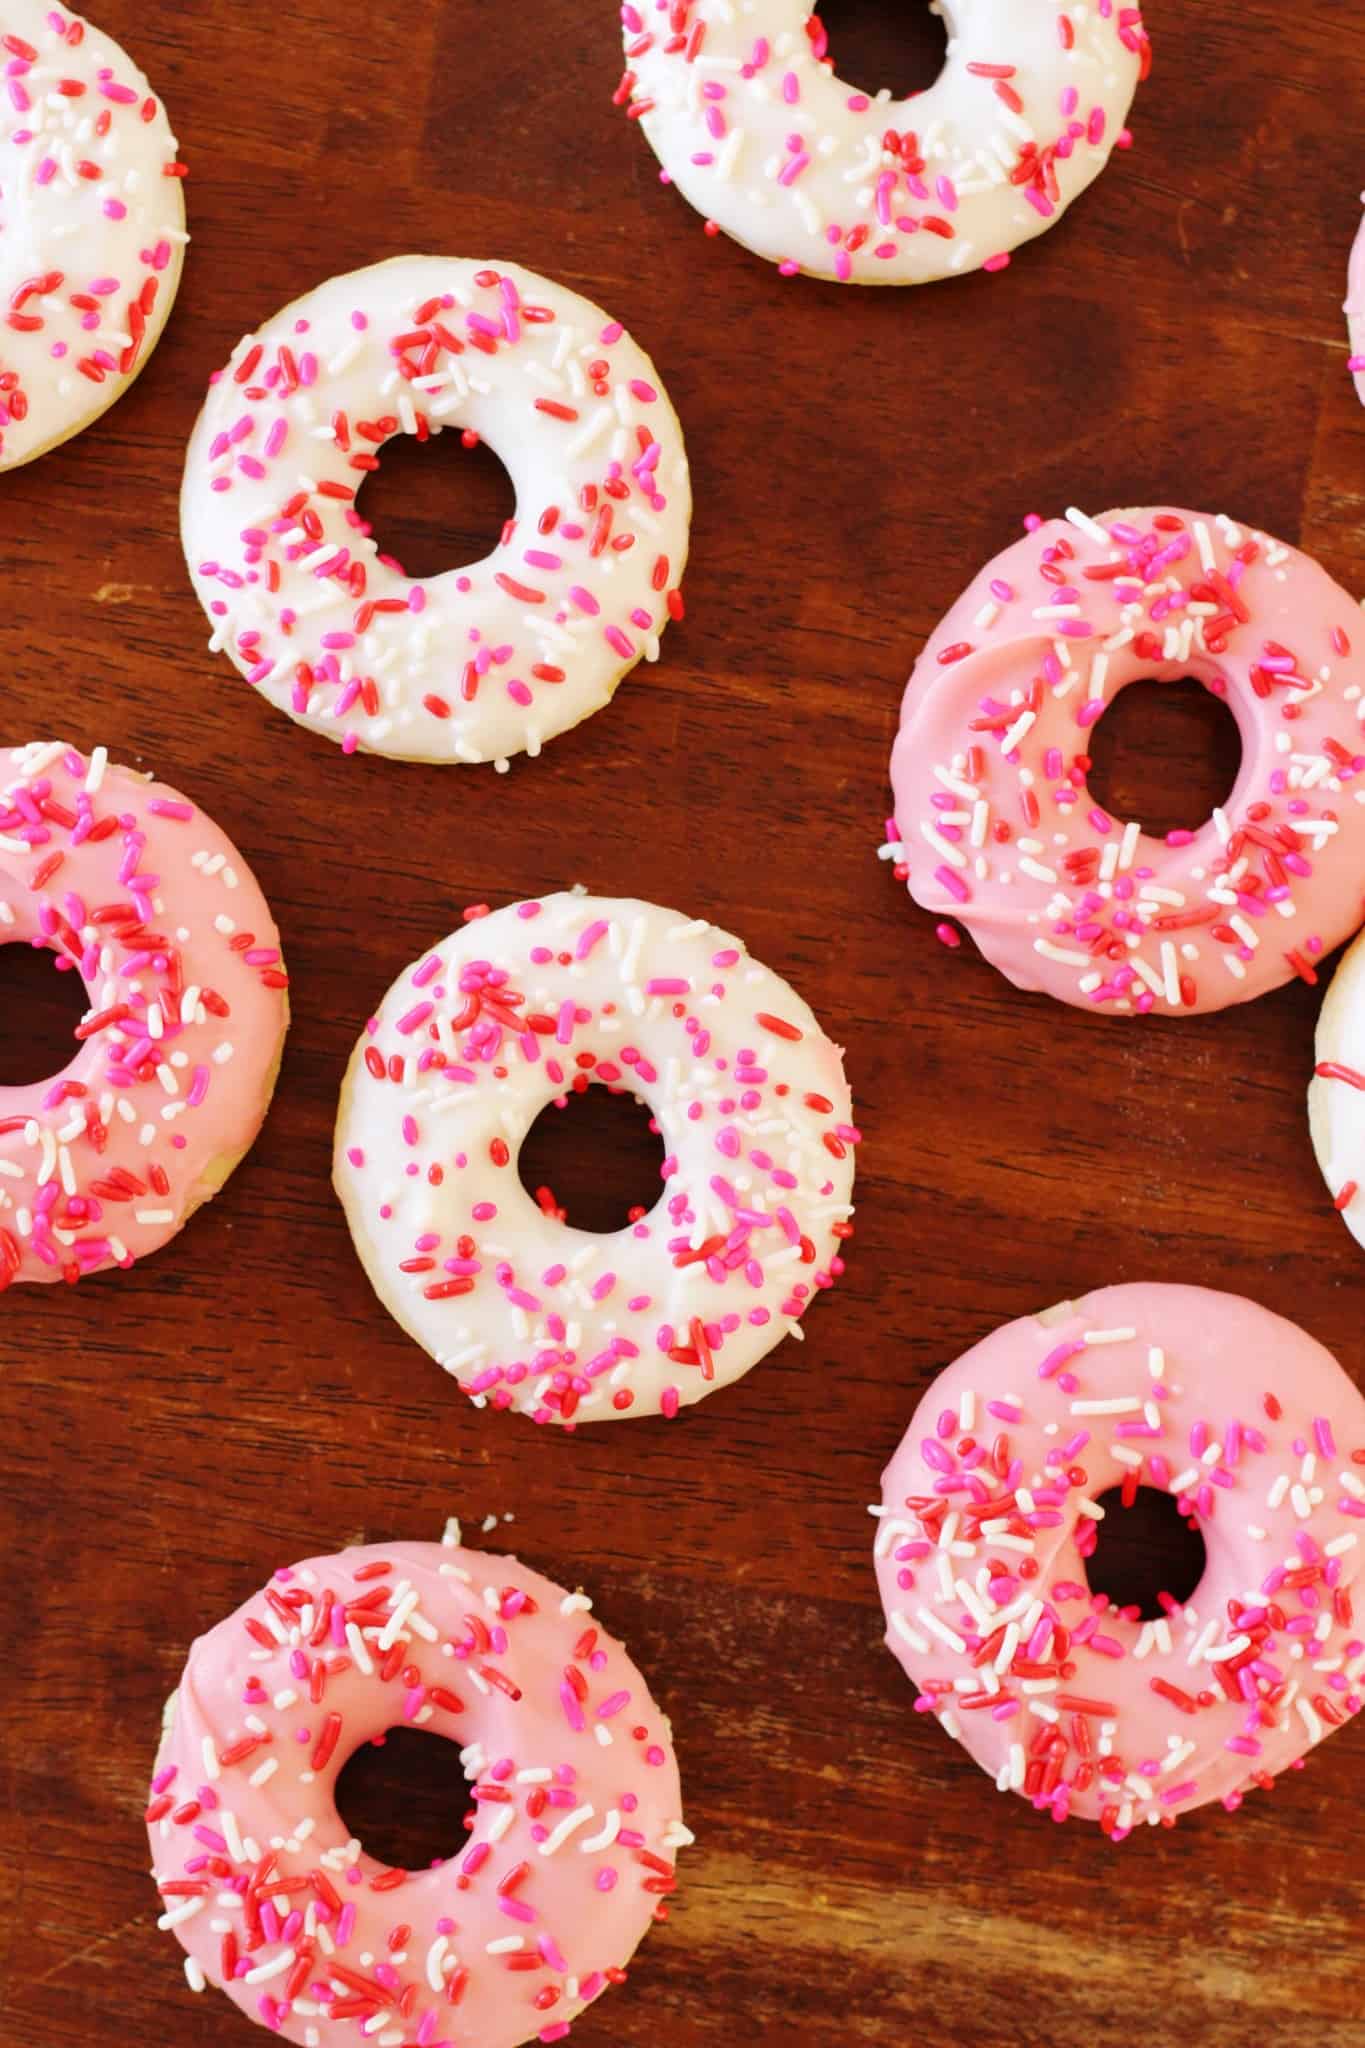 This delicious donuts recipe uses candy melts instead of frosting for the ultimate sweetness. Add Valentine's Day sprinkles or customize for any holiday!